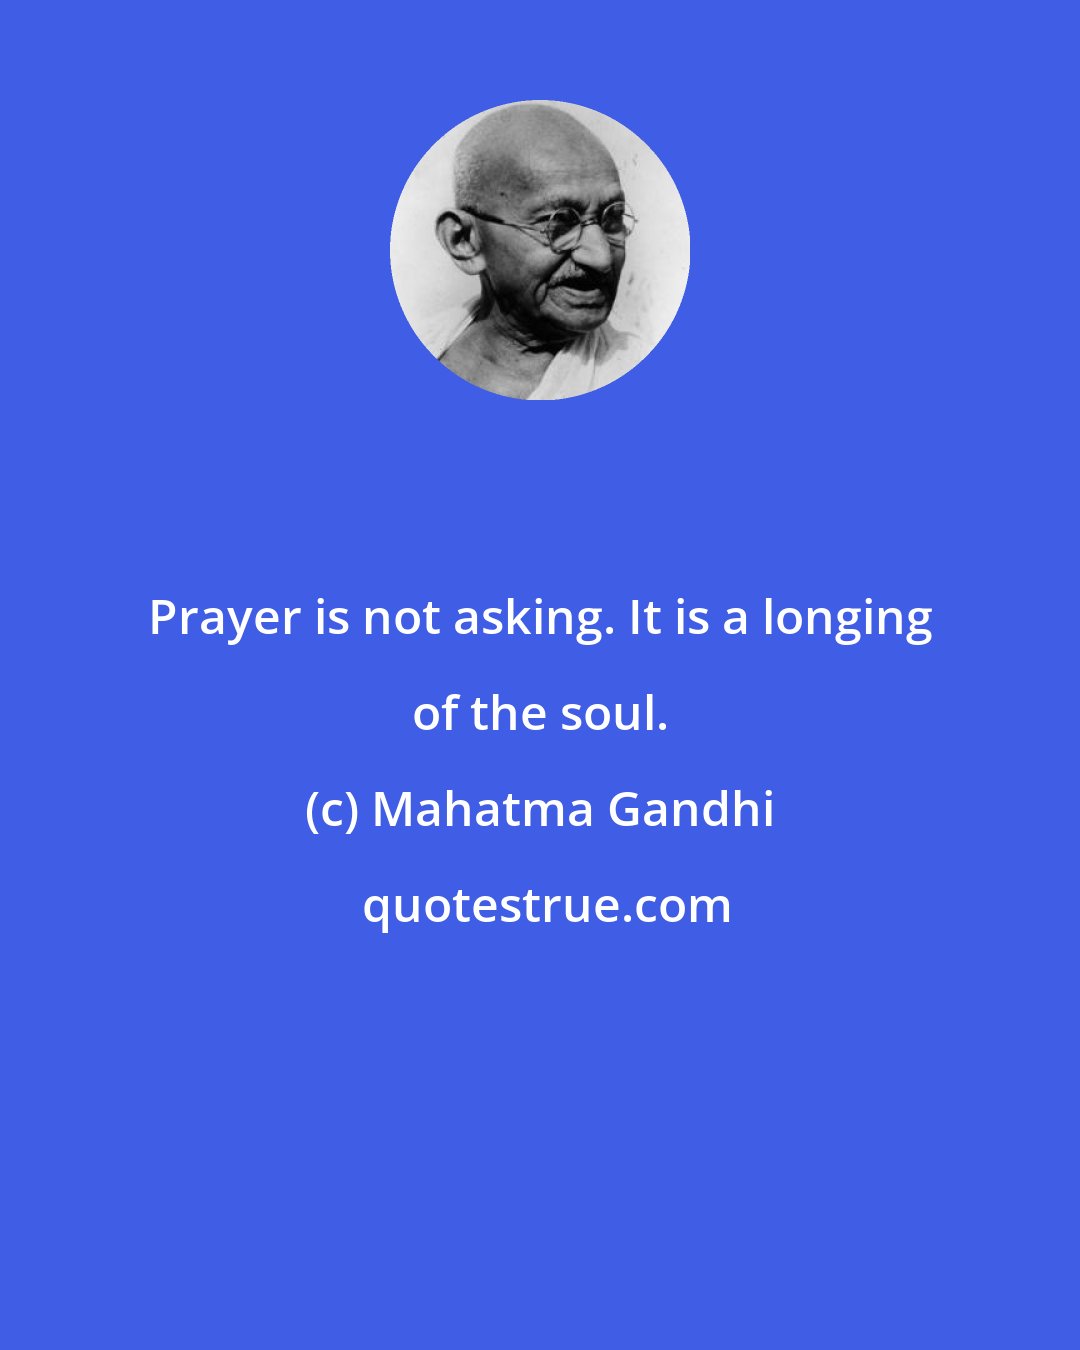 Mahatma Gandhi: Prayer is not asking. It is a longing of the soul.